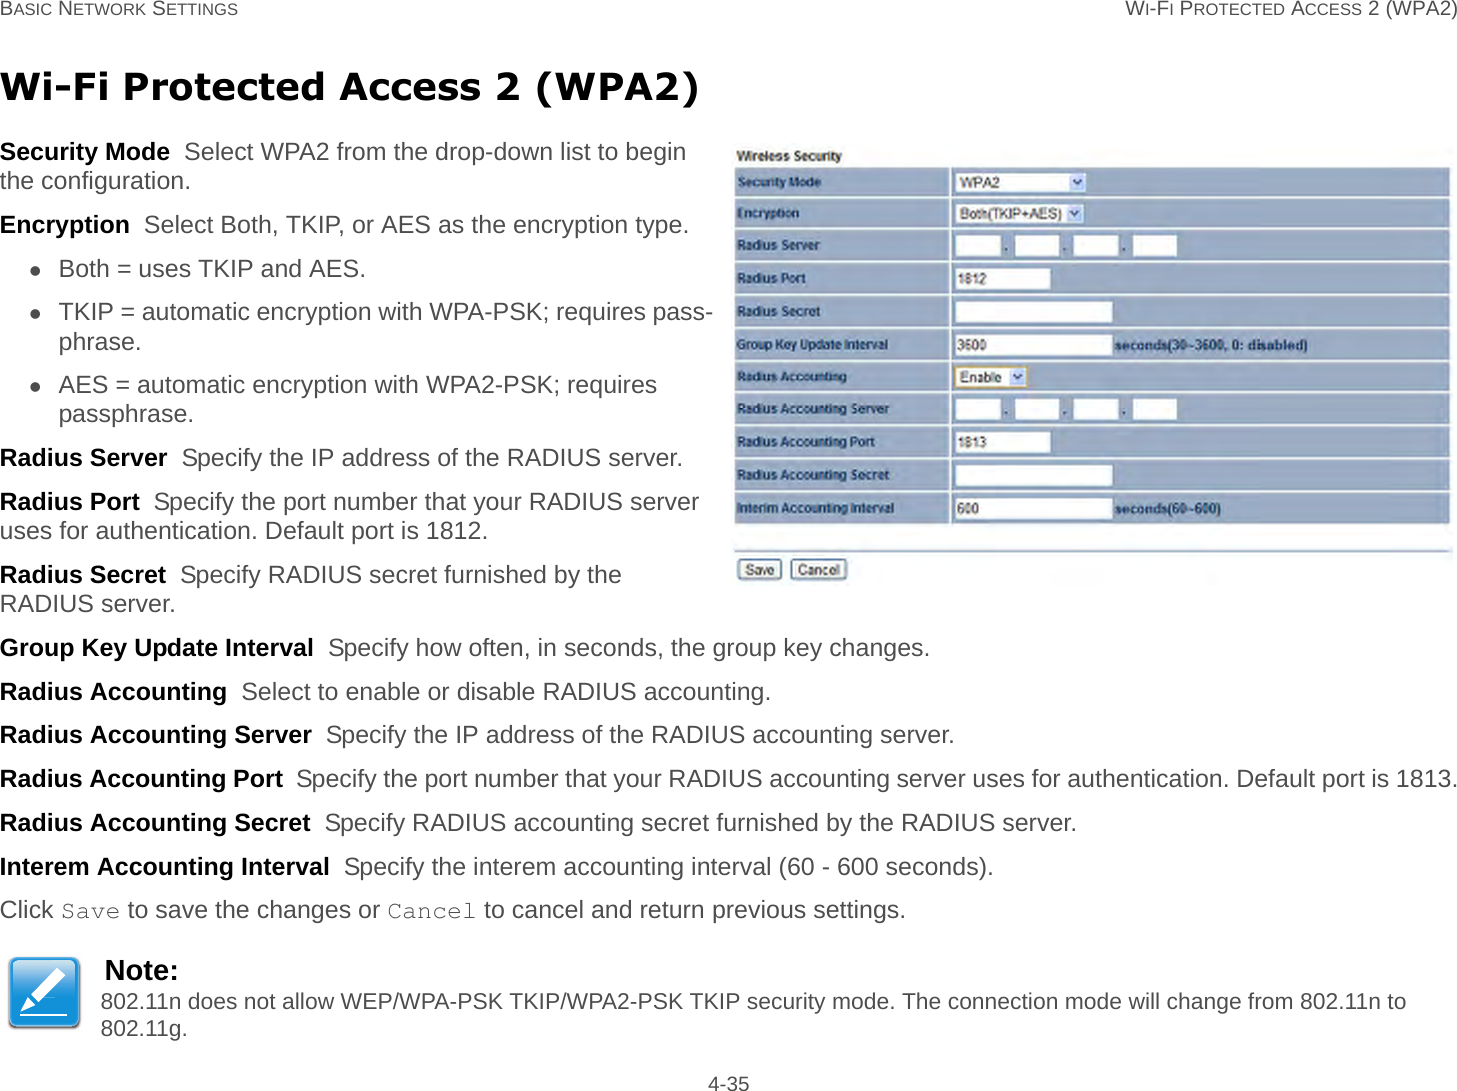 BASIC NETWORK SETTINGS WI-FI PROTECTED ACCESS 2 (WPA2) 4-35Wi-Fi Protected Access 2 (WPA2)Security Mode  Select WPA2 from the drop-down list to begin the configuration.Encryption  Select Both, TKIP, or AES as the encryption type.Both = uses TKIP and AES.TKIP = automatic encryption with WPA-PSK; requires pass-phrase.AES = automatic encryption with WPA2-PSK; requires passphrase.Radius Server  Specify the IP address of the RADIUS server.Radius Port  Specify the port number that your RADIUS server uses for authentication. Default port is 1812.Radius Secret  Specify RADIUS secret furnished by the RADIUS server.Group Key Update Interval  Specify how often, in seconds, the group key changes.Radius Accounting  Select to enable or disable RADIUS accounting.Radius Accounting Server  Specify the IP address of the RADIUS accounting server.Radius Accounting Port  Specify the port number that your RADIUS accounting server uses for authentication. Default port is 1813.Radius Accounting Secret  Specify RADIUS accounting secret furnished by the RADIUS server.Interem Accounting Interval  Specify the interem accounting interval (60 - 600 seconds).Click Save to save the changes or Cancel to cancel and return previous settings.Note:802.11n does not allow WEP/WPA-PSK TKIP/WPA2-PSK TKIP security mode. The connection mode will change from 802.11n to 802.11g.